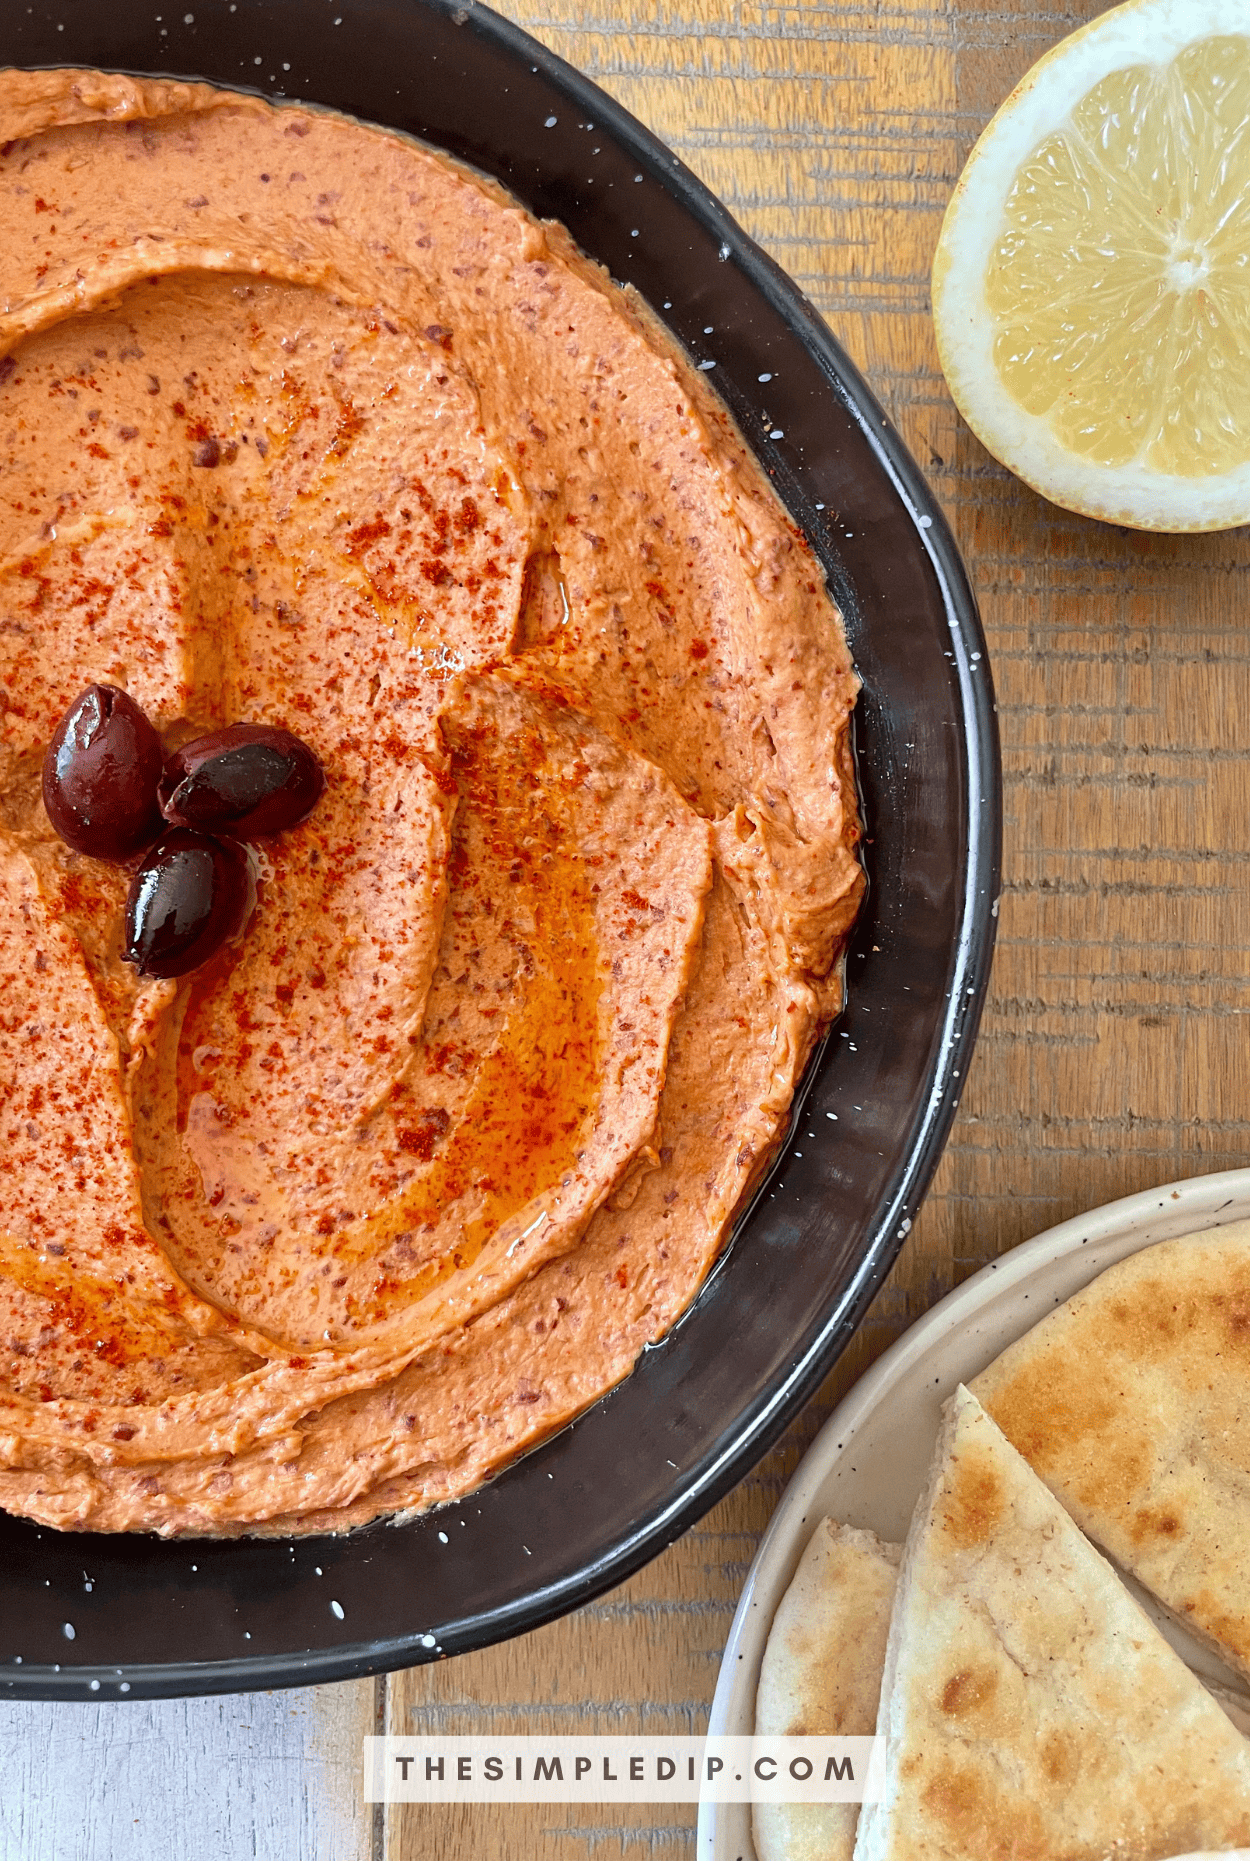 This is a picture of Red Bean Hummus - it has a vibrant orange color with a dusting of red paprika and a trio of olives in the center to elevate the presentation. It's accompanied by a lemon wedge and a plate of sliced pitas.